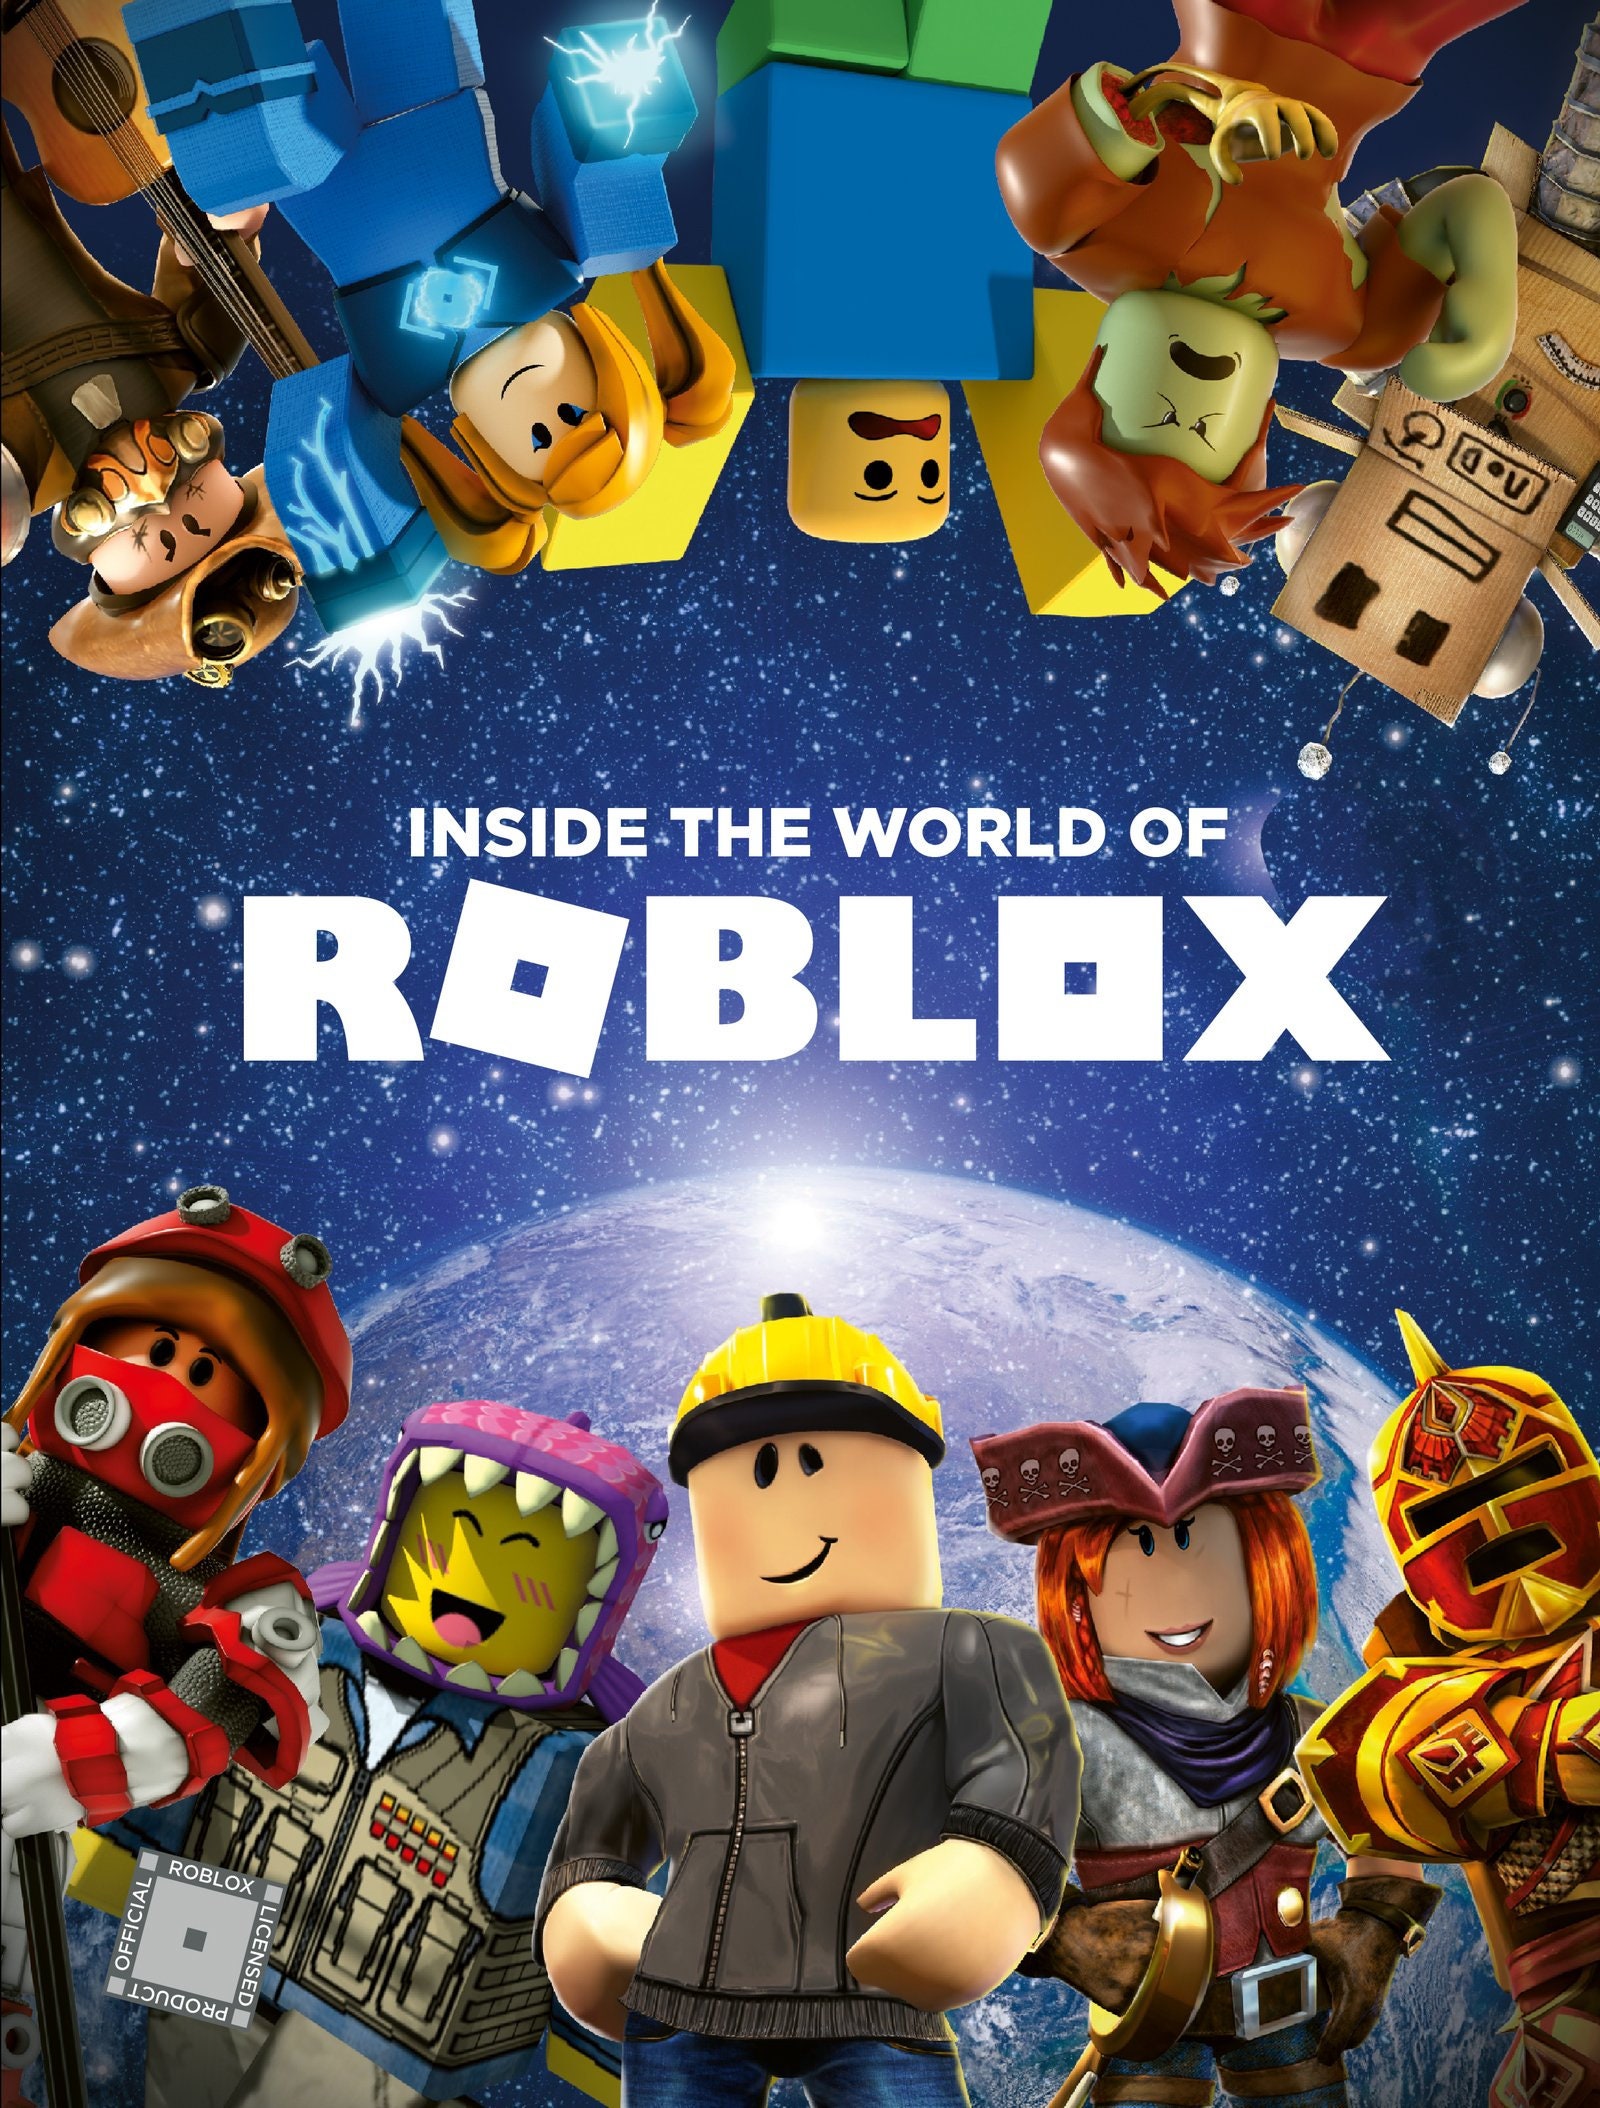 Aesthetic Roblox  Hardcover Journal for Sale by Michae5horpe